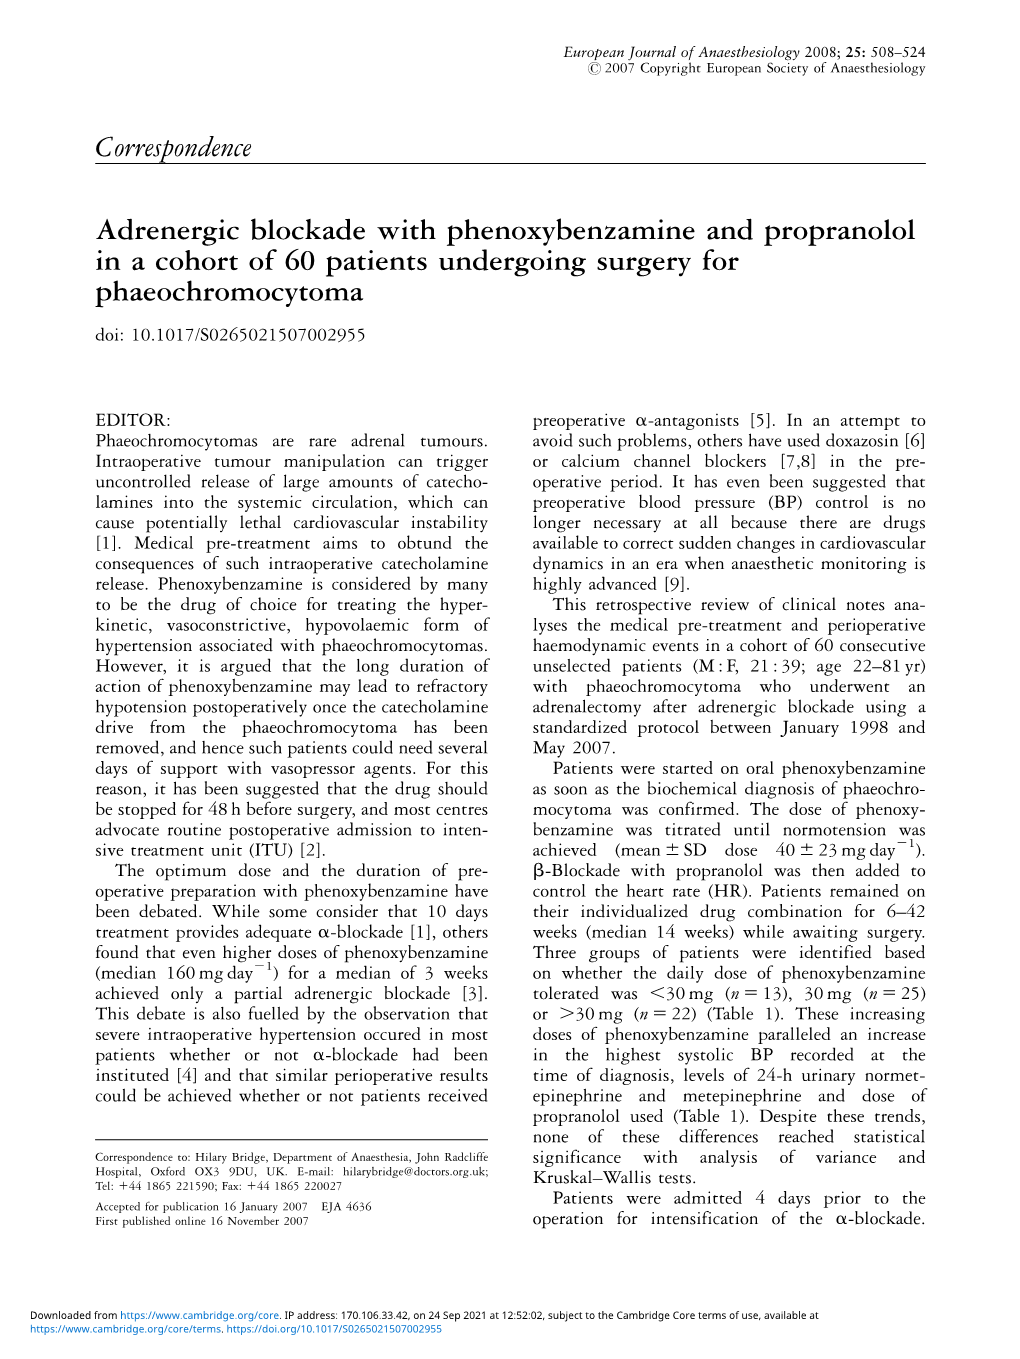 Adrenergic Blockade with Phenoxybenzamine and Propranolol in a Cohort of 60 Patients Undergoing Surgery for Phaeochromocytoma Doi: 10.1017/S0265021507002955